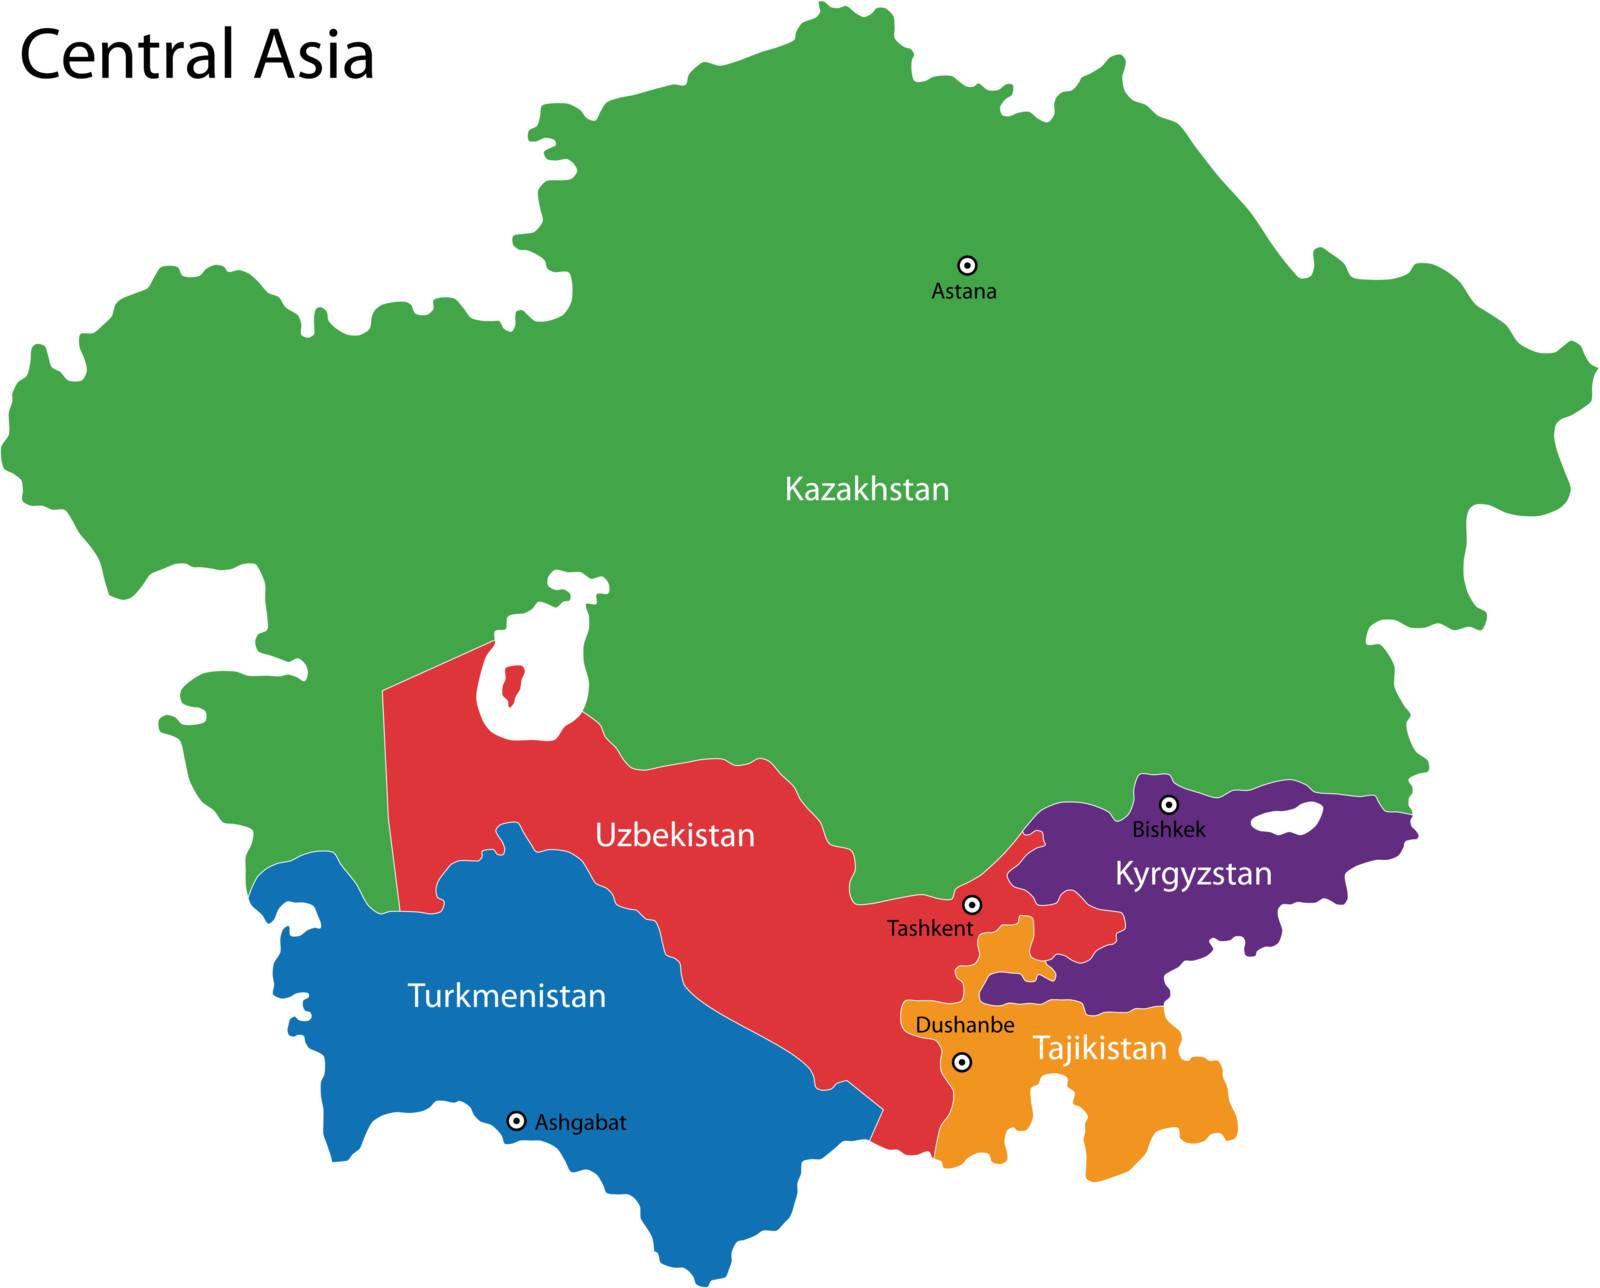 Central Asia map by Volina